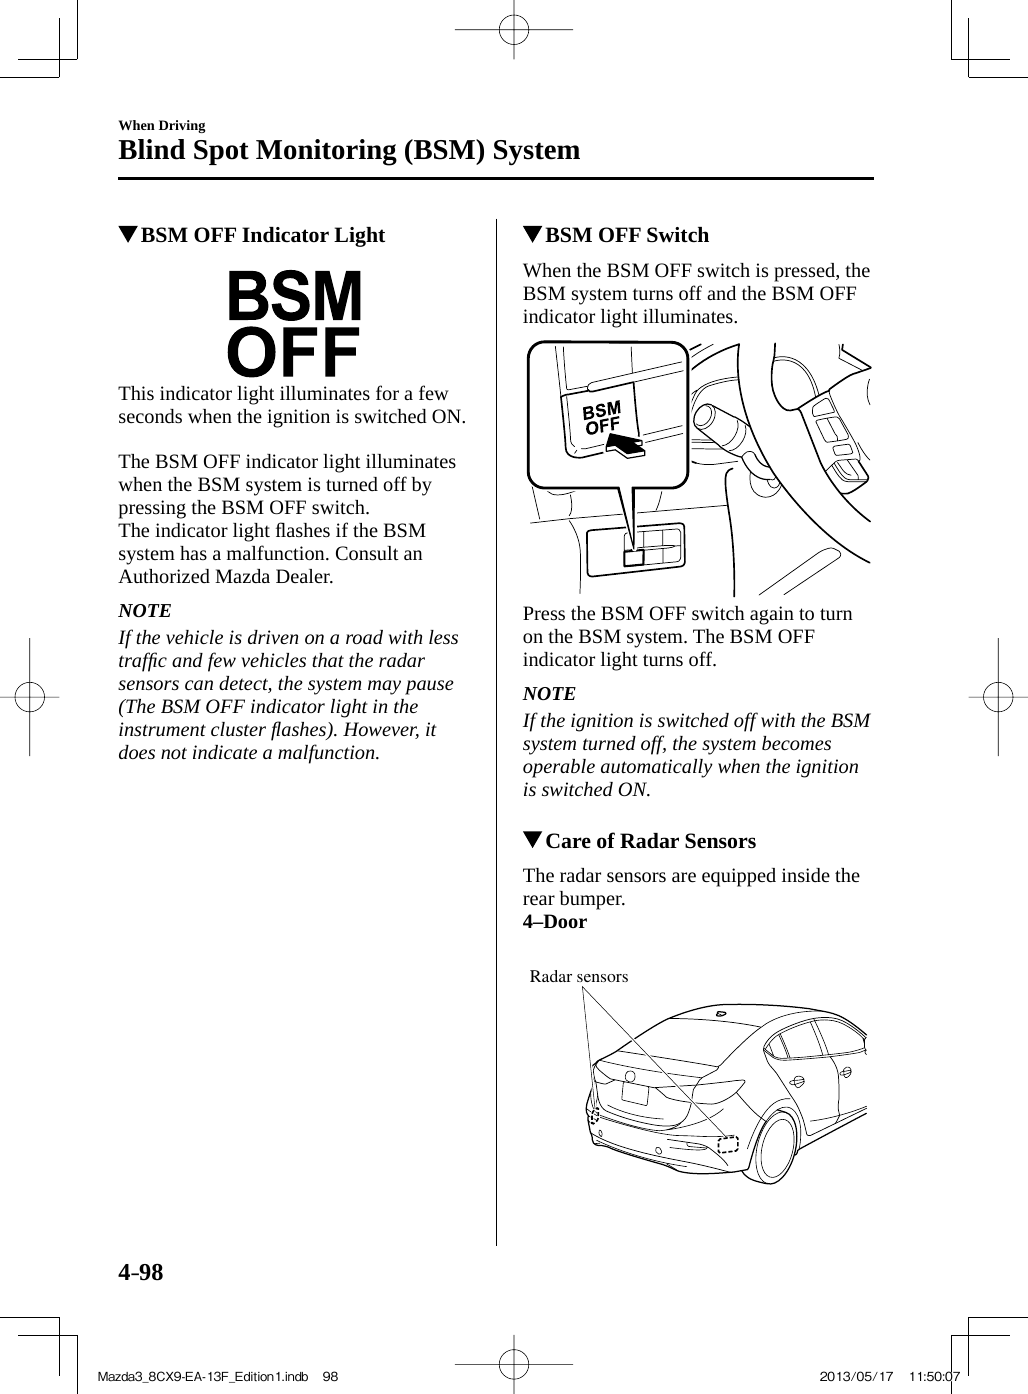 4–98When DrivingBlind Spot Monitoring (BSM) System          BSM OFF Indicator Light               This indicator light illuminates for a few seconds when the ignition is switched ON.    The BSM OFF indicator light illuminates when the BSM system is turned off by pressing the BSM OFF switch.  The  indicator  light  ﬂ ashes if the BSM system has a malfunction. Consult an Authorized Mazda Dealer.   NOTE  If the vehicle is driven on a road with less trafﬁ c and few vehicles that the radar sensors can detect, the system may pause (The BSM OFF indicator light in the instrument cluster ﬂ ashes). However, it does not indicate a malfunction.             BSM OFF Switch            When  the  BSM  OFF  switch  is  pressed,  the BSM system turns off and the BSM OFF indicator light illuminates.    Press the BSM OFF switch again to turn on the BSM system. The BSM OFF indicator light turns off.   NOTE  If the ignition is switched off with the BSM system turned off, the system becomes operable automatically when the ignition is switched ON.             Care of Radar Sensors            The  radar  sensors  are  equipped  inside  the rear bumper.   4–Door    Radar sensors Mazda3_8CX9-EA-13F_Edition1.indb   98Mazda3_8CX9-EA-13F_Edition1.indb   98 2013/05/17   11:50:072013/05/17   11:50:07